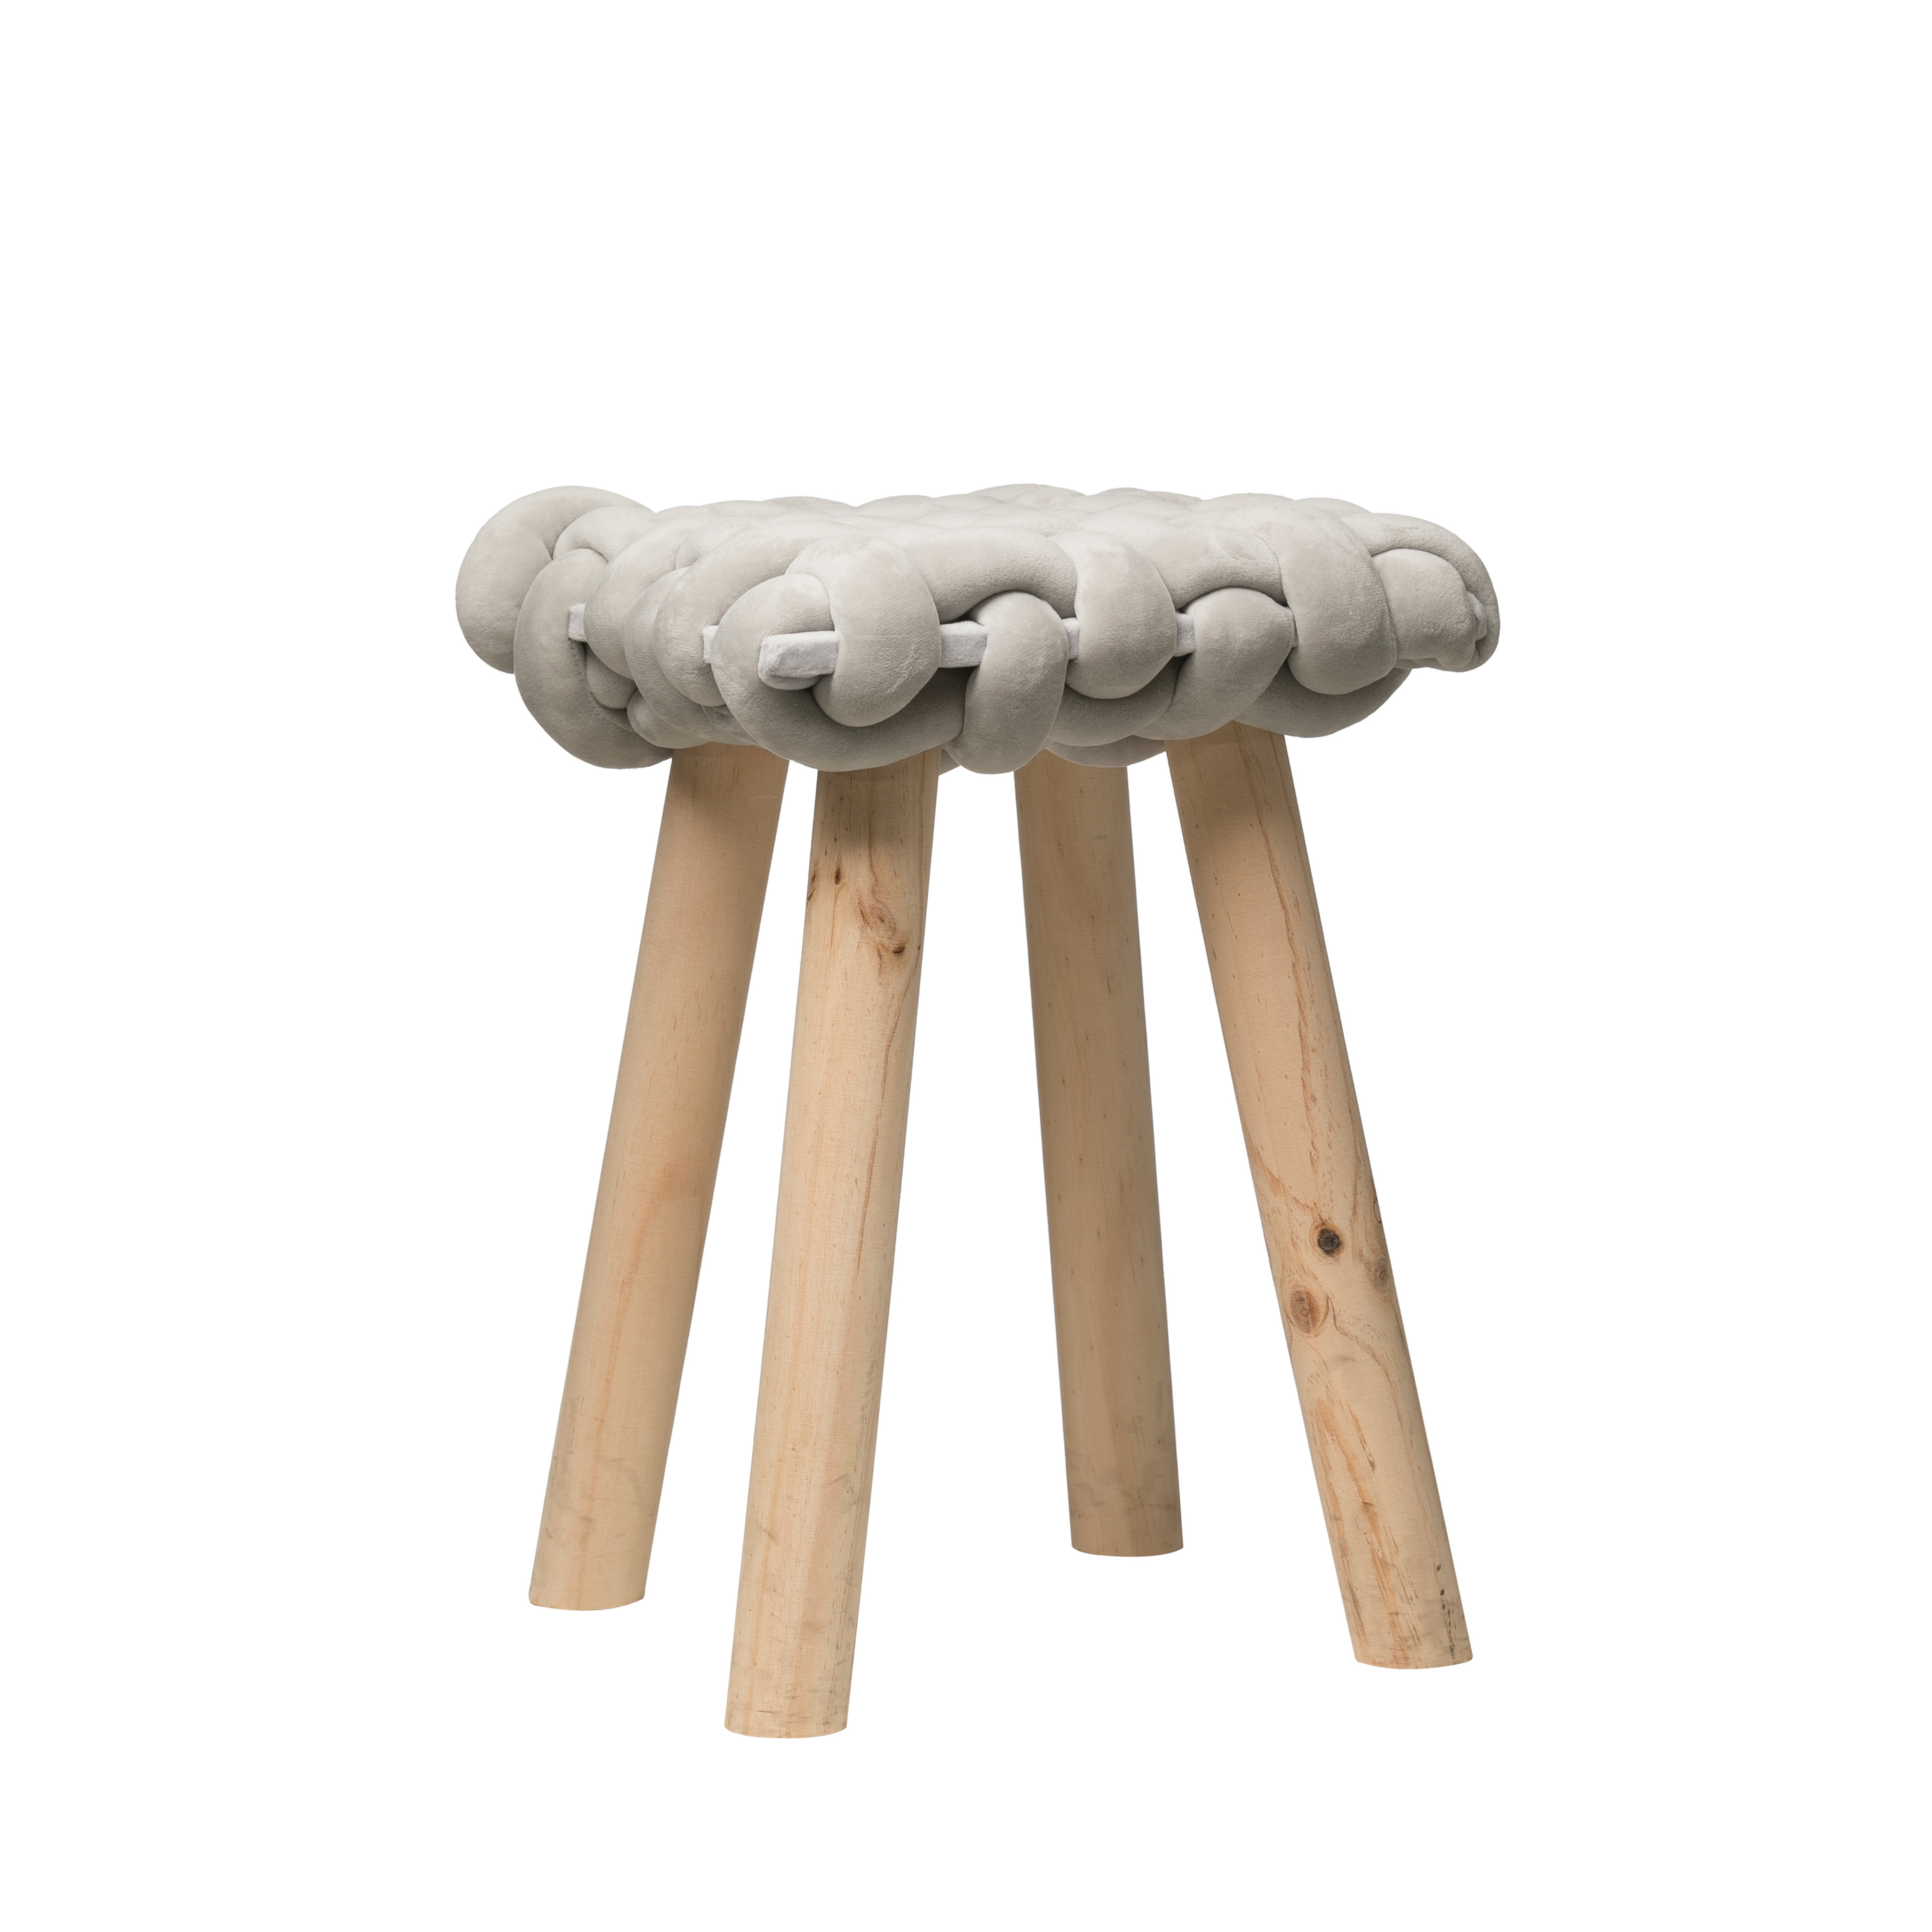 18.5"H Wood Stool with Chunky Woven Seat - Moss & Wilder